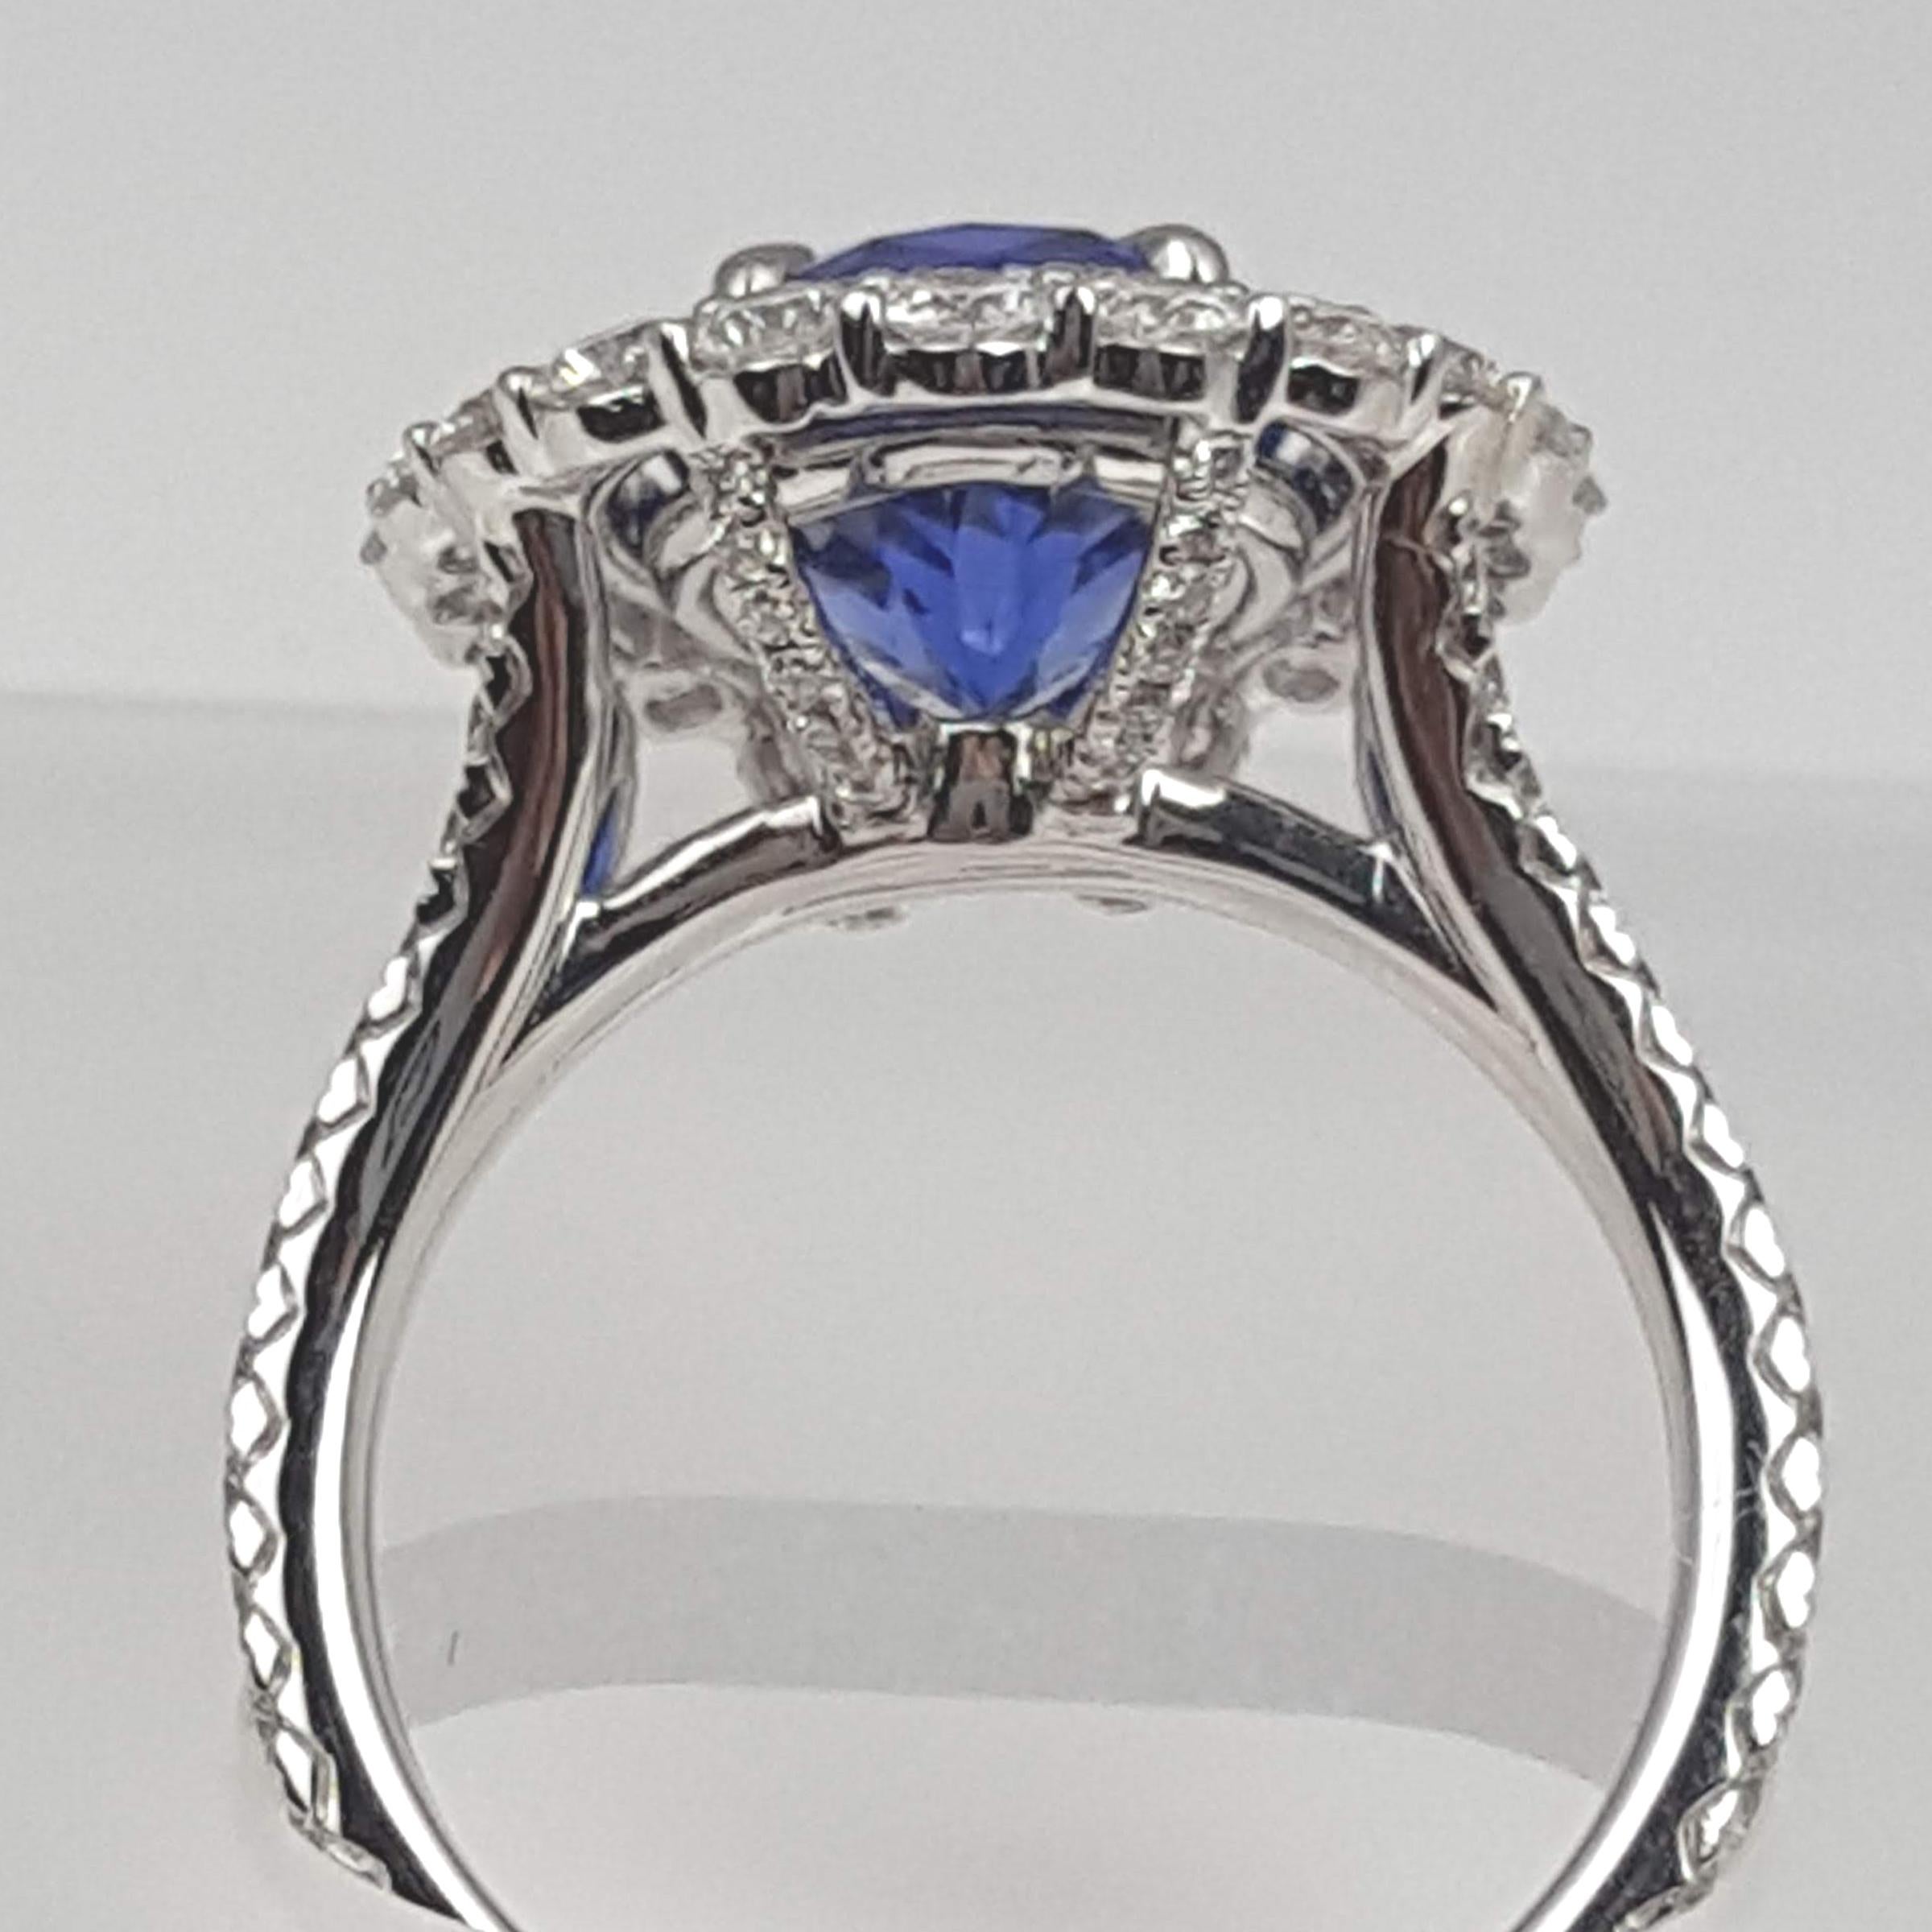 Contemporary GIA Certified 3.97 Carat Oval Cut Tanzanite and Diamond Halo Ring ref632 For Sale